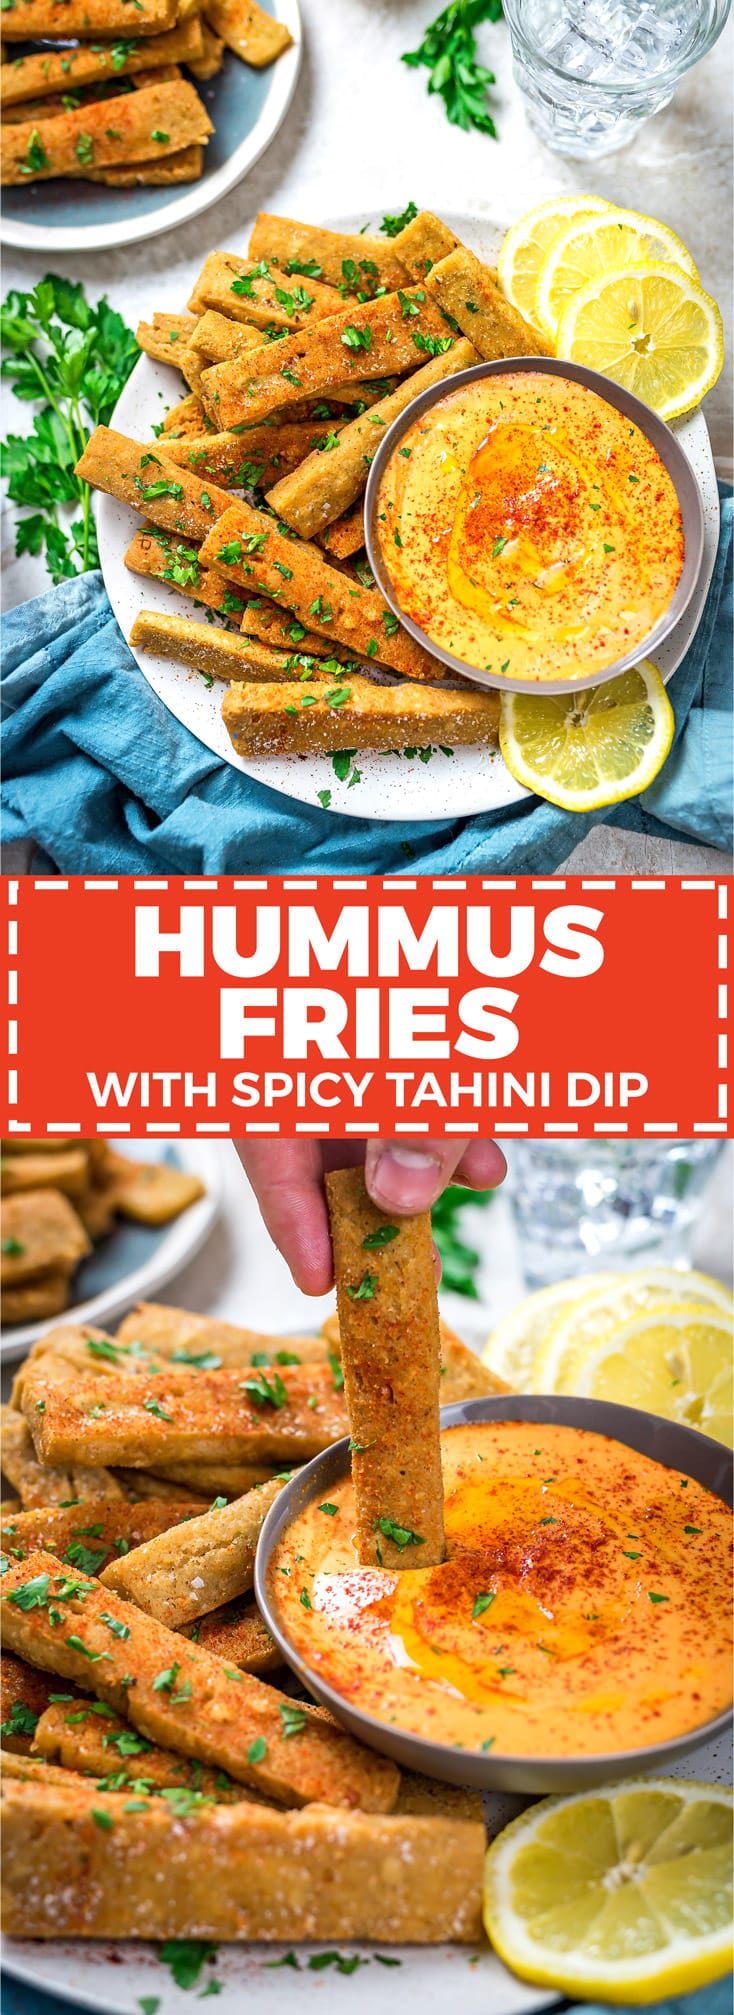 Hummus Fries with Spicy Tahini Dip. These fritters are made with chickpea flour and tahini for a crisp-exteriored snack with a custardy, hummus-like center. | hostthetoast.com